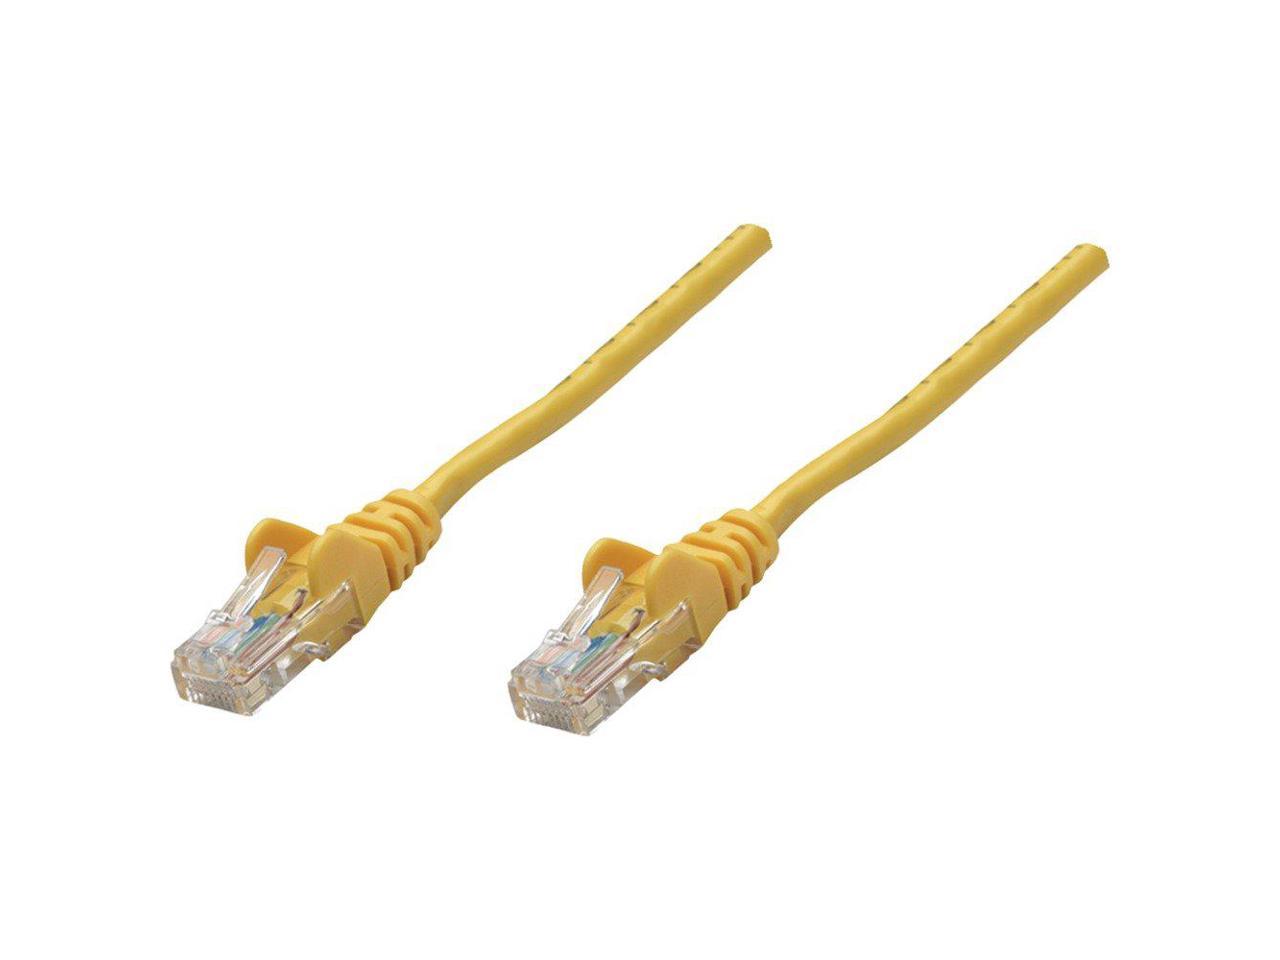 INTELLINET 319973 CAT-5E UTP Patch Cable 50ft Gray 